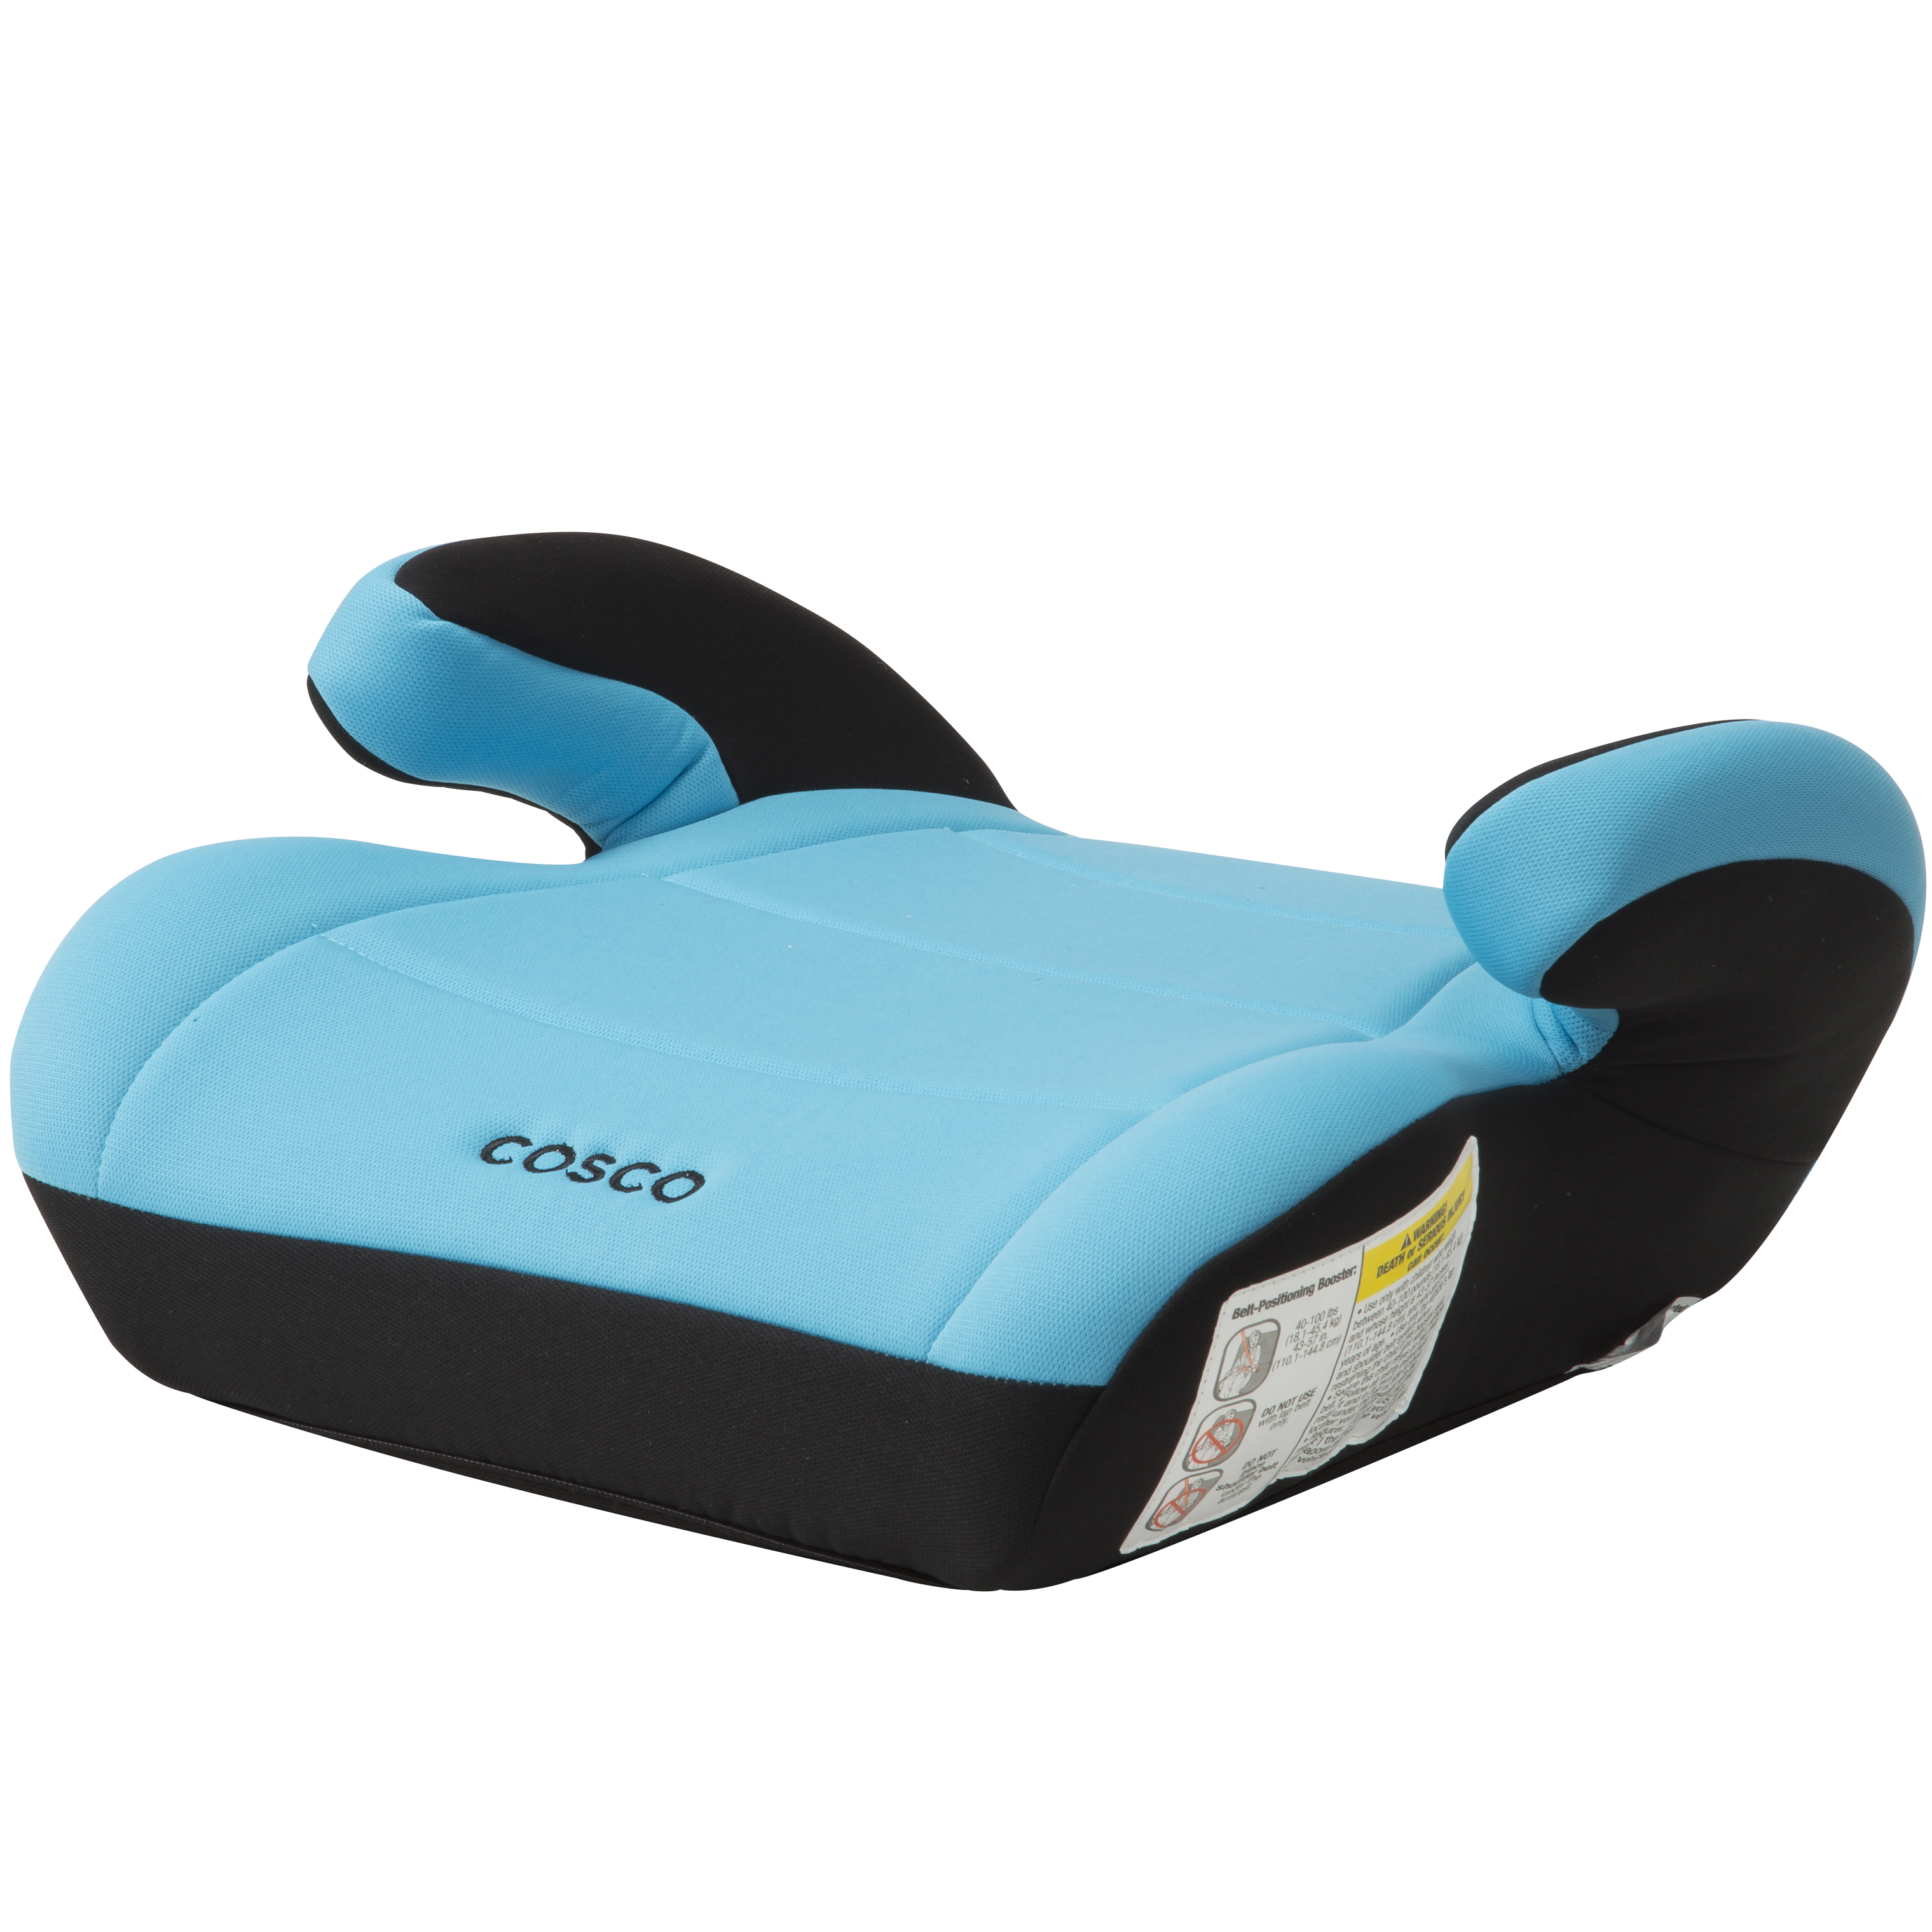 Cosco Topside Booster Car Seat, Turquoise - image 1 of 5